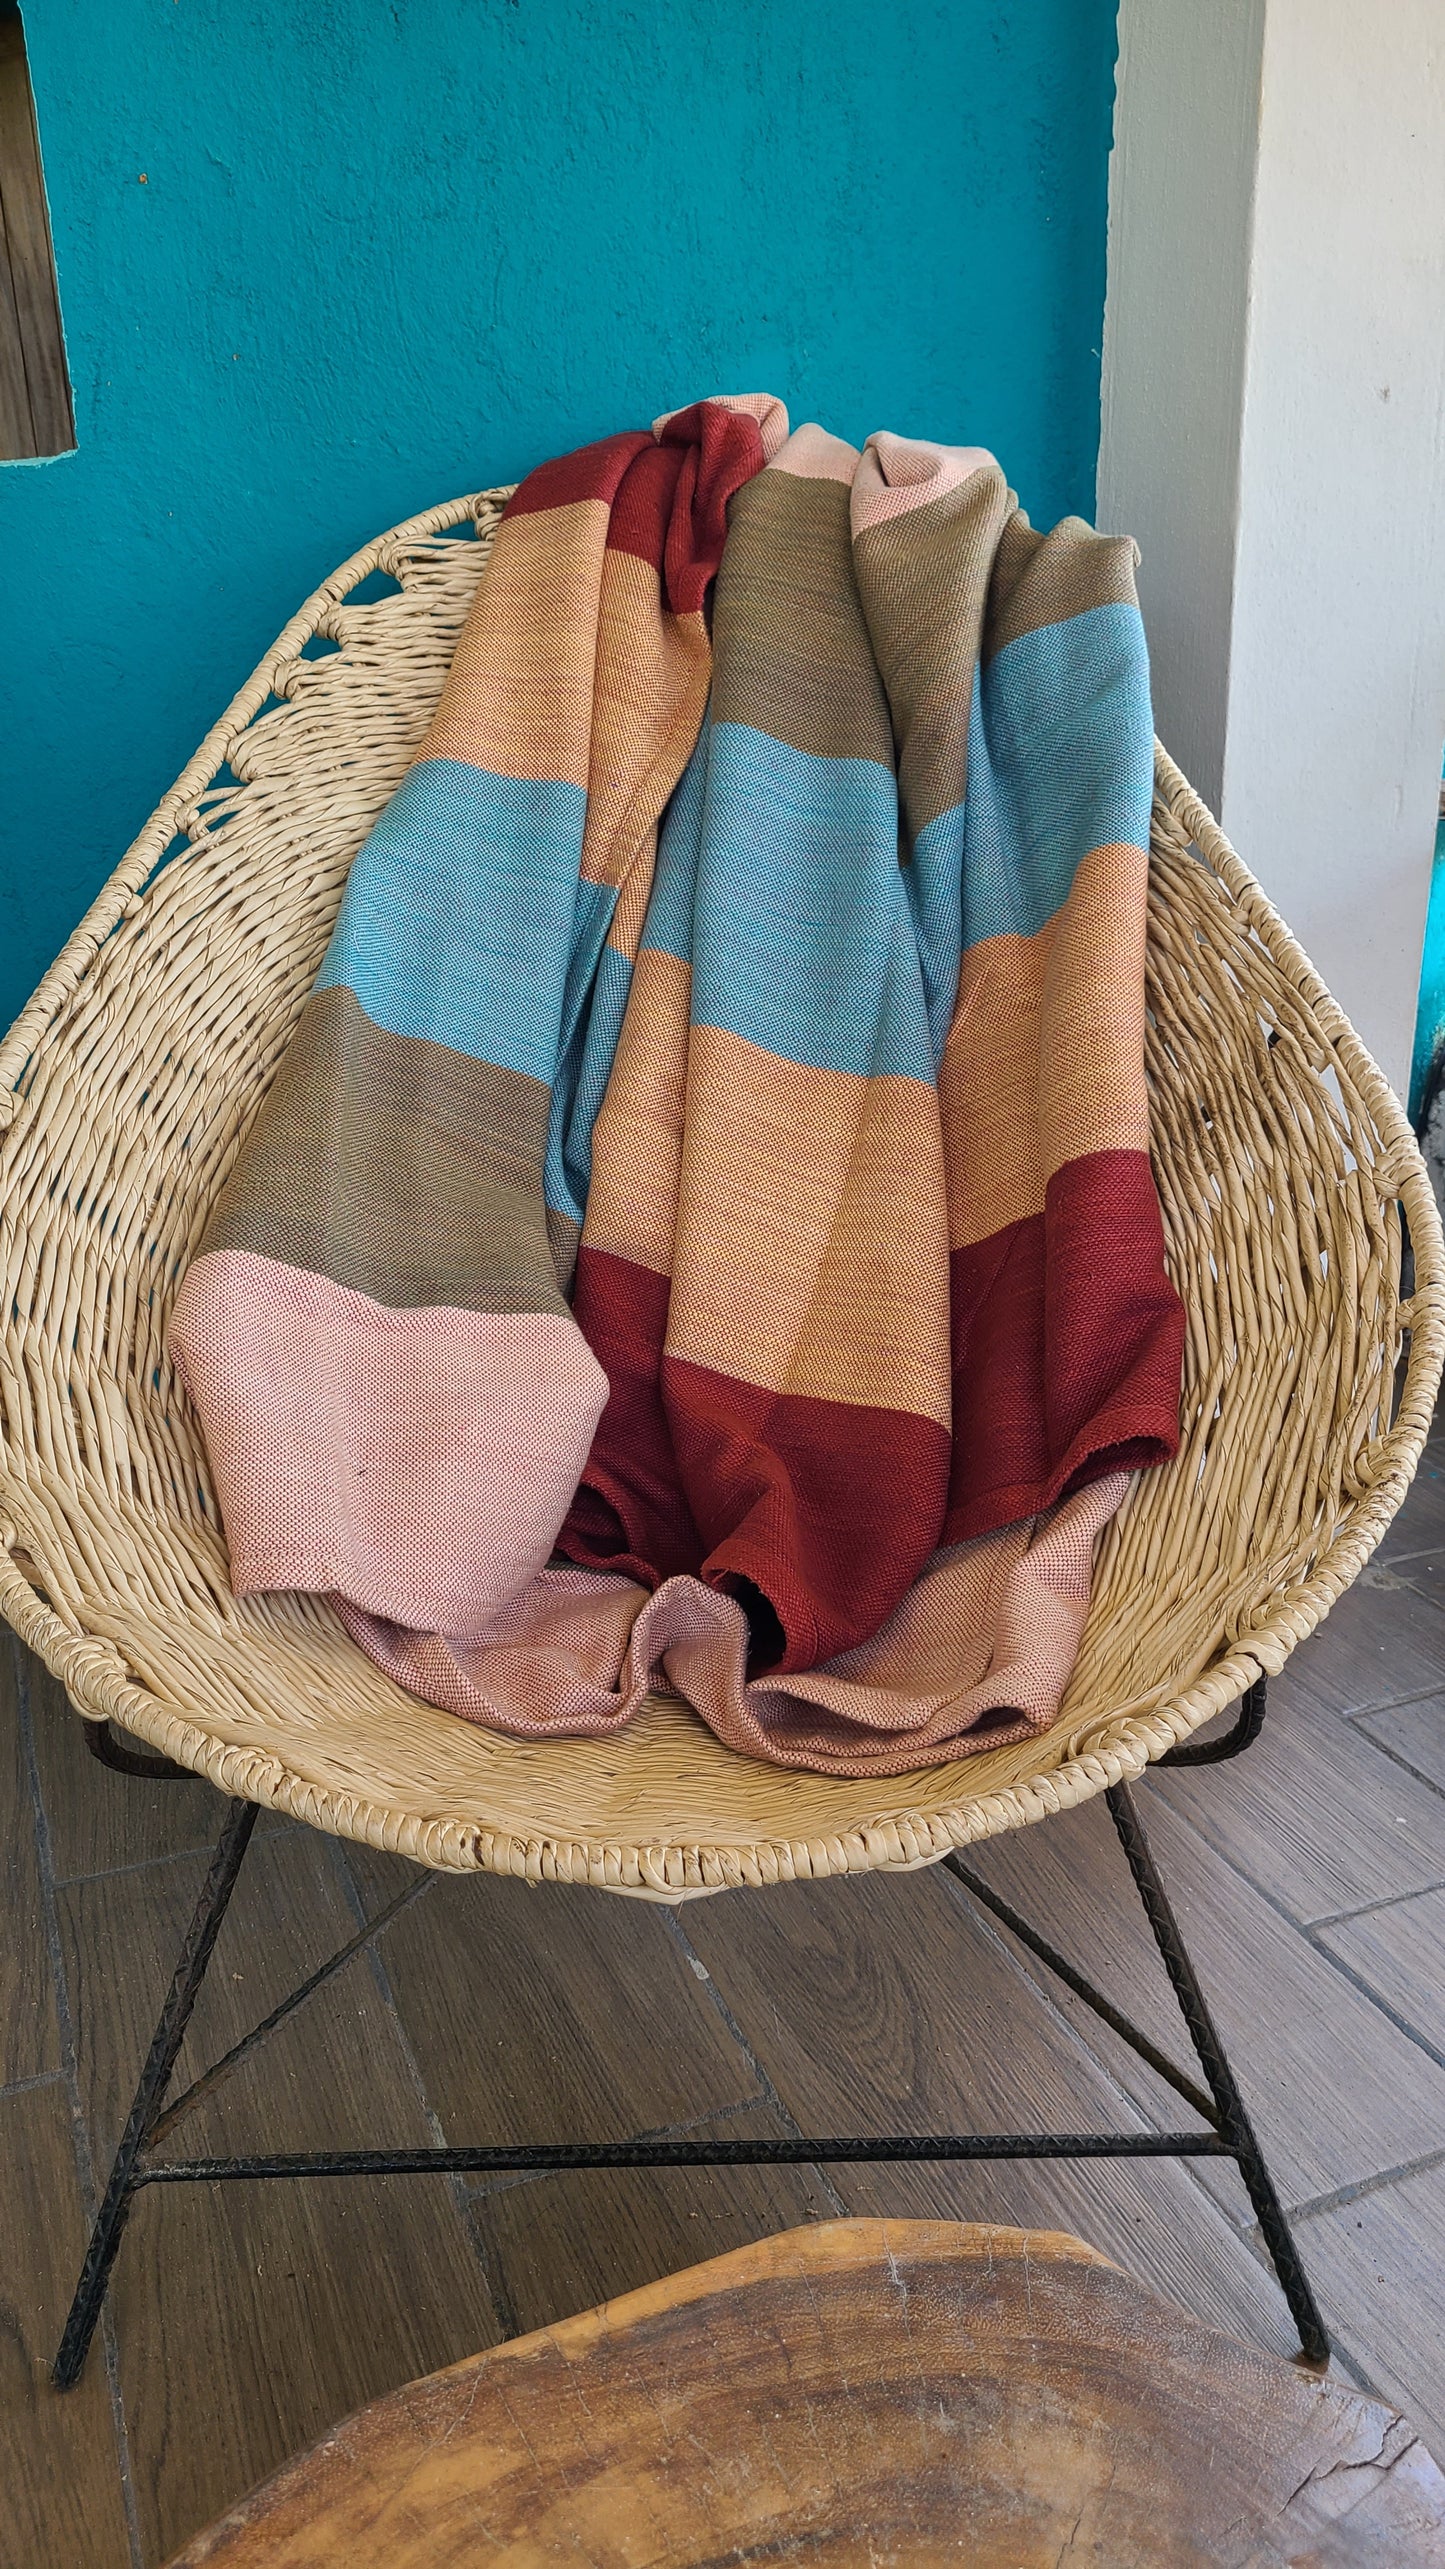 Clay bands Throw Blanket